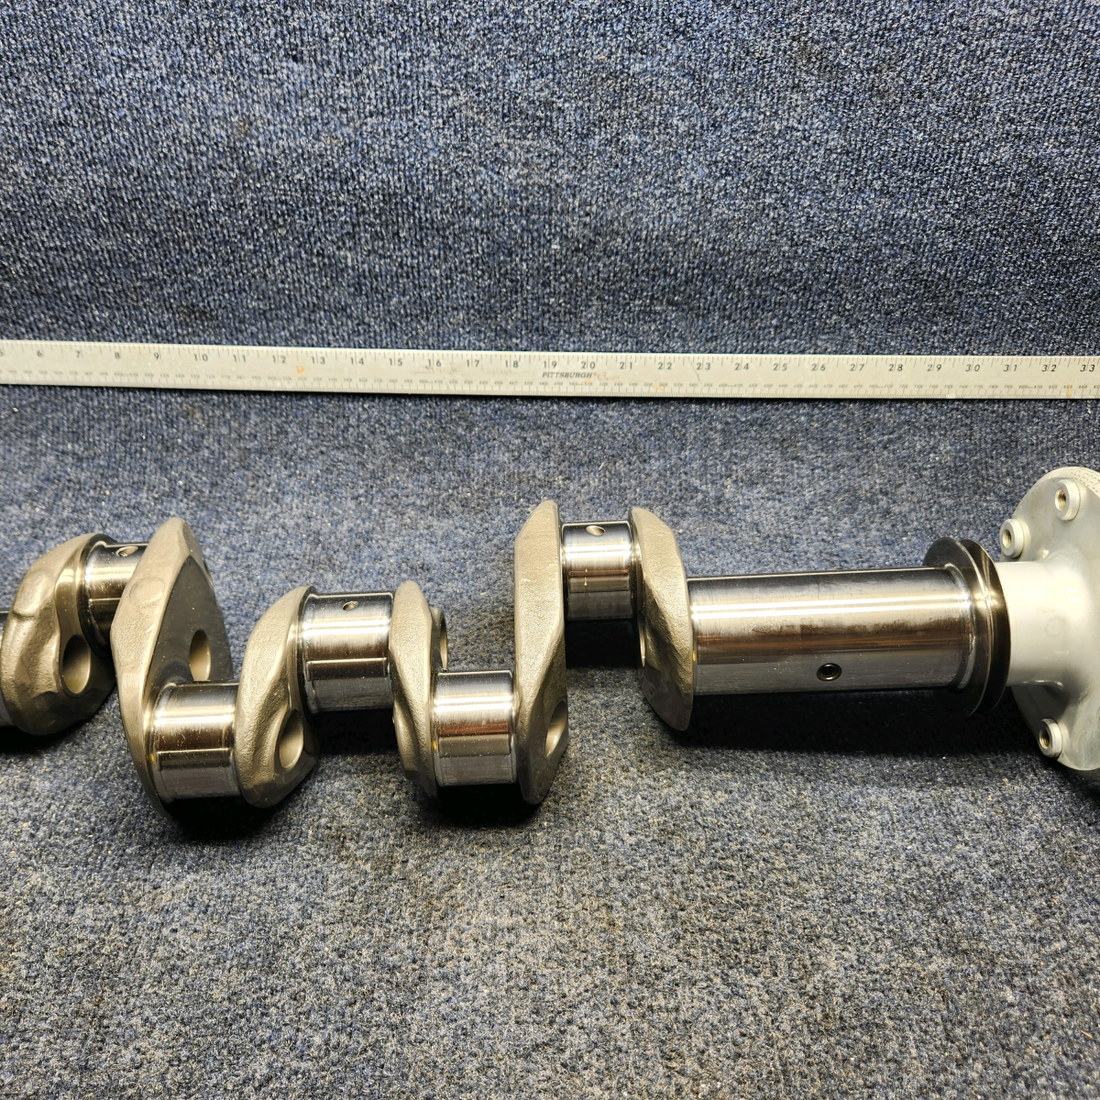 Used aircraft parts for sale, 13B47024 Lycoming Lycoming O-320 CRANK SHAFT ASSY SOLD W/ 8130-3 AND SB 505B DT - SB530B DT.